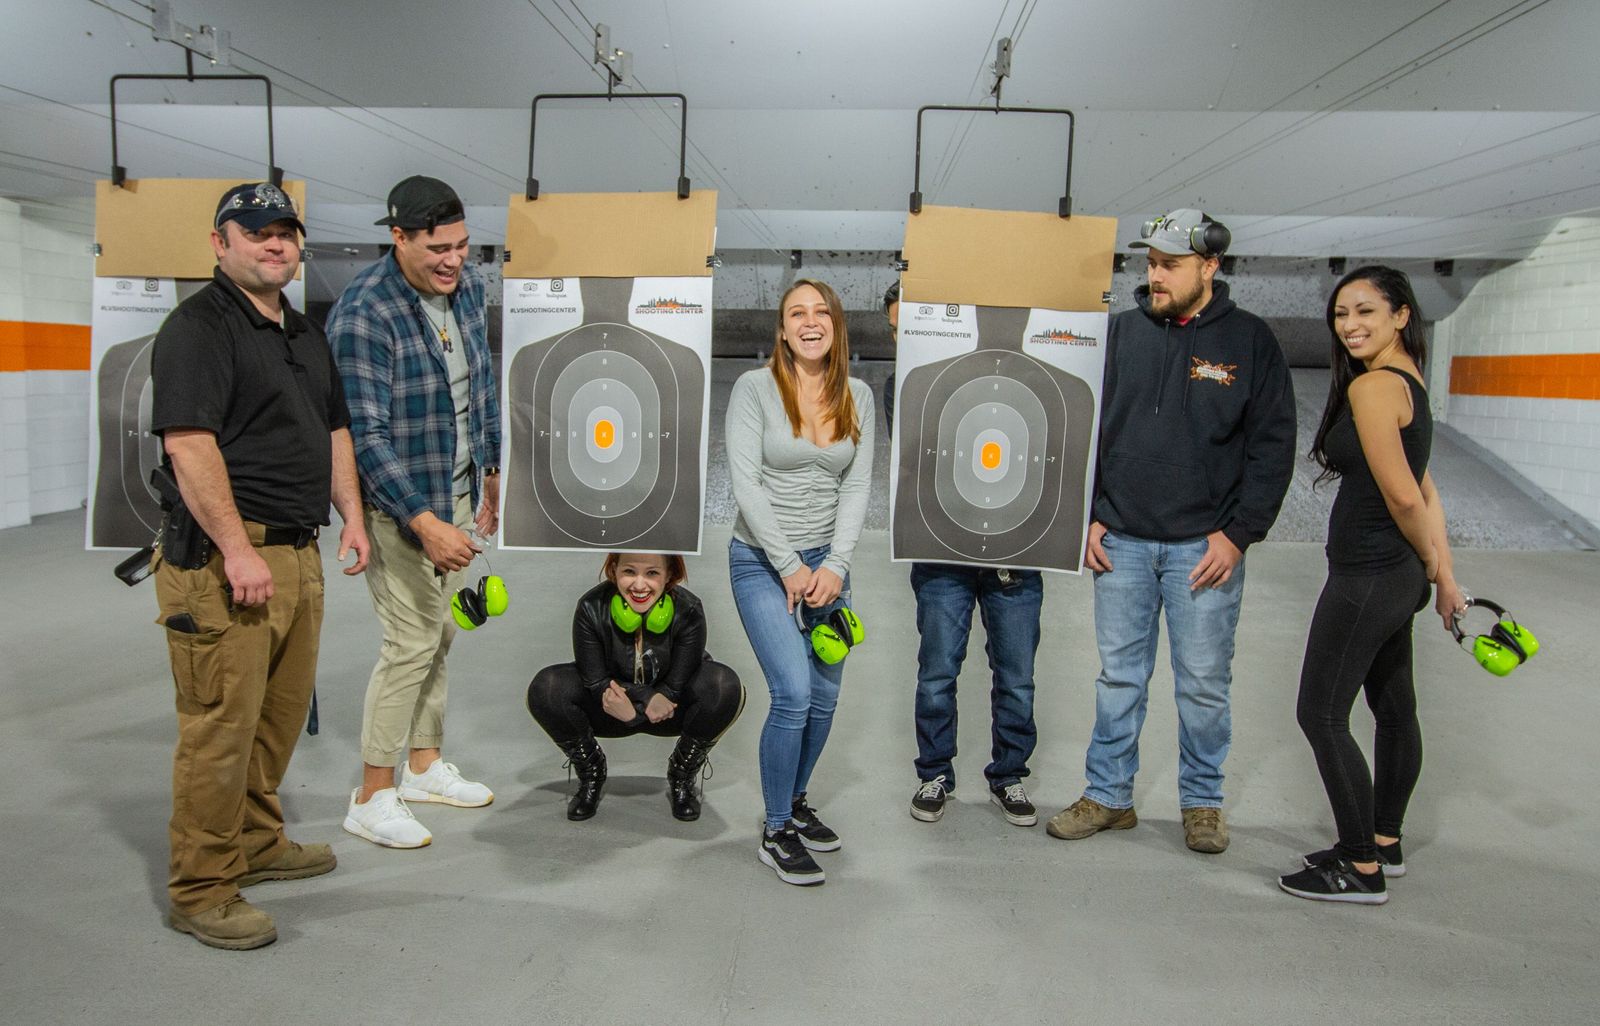 How to Have an Exhilarating Shooting Experience in Las Vegas